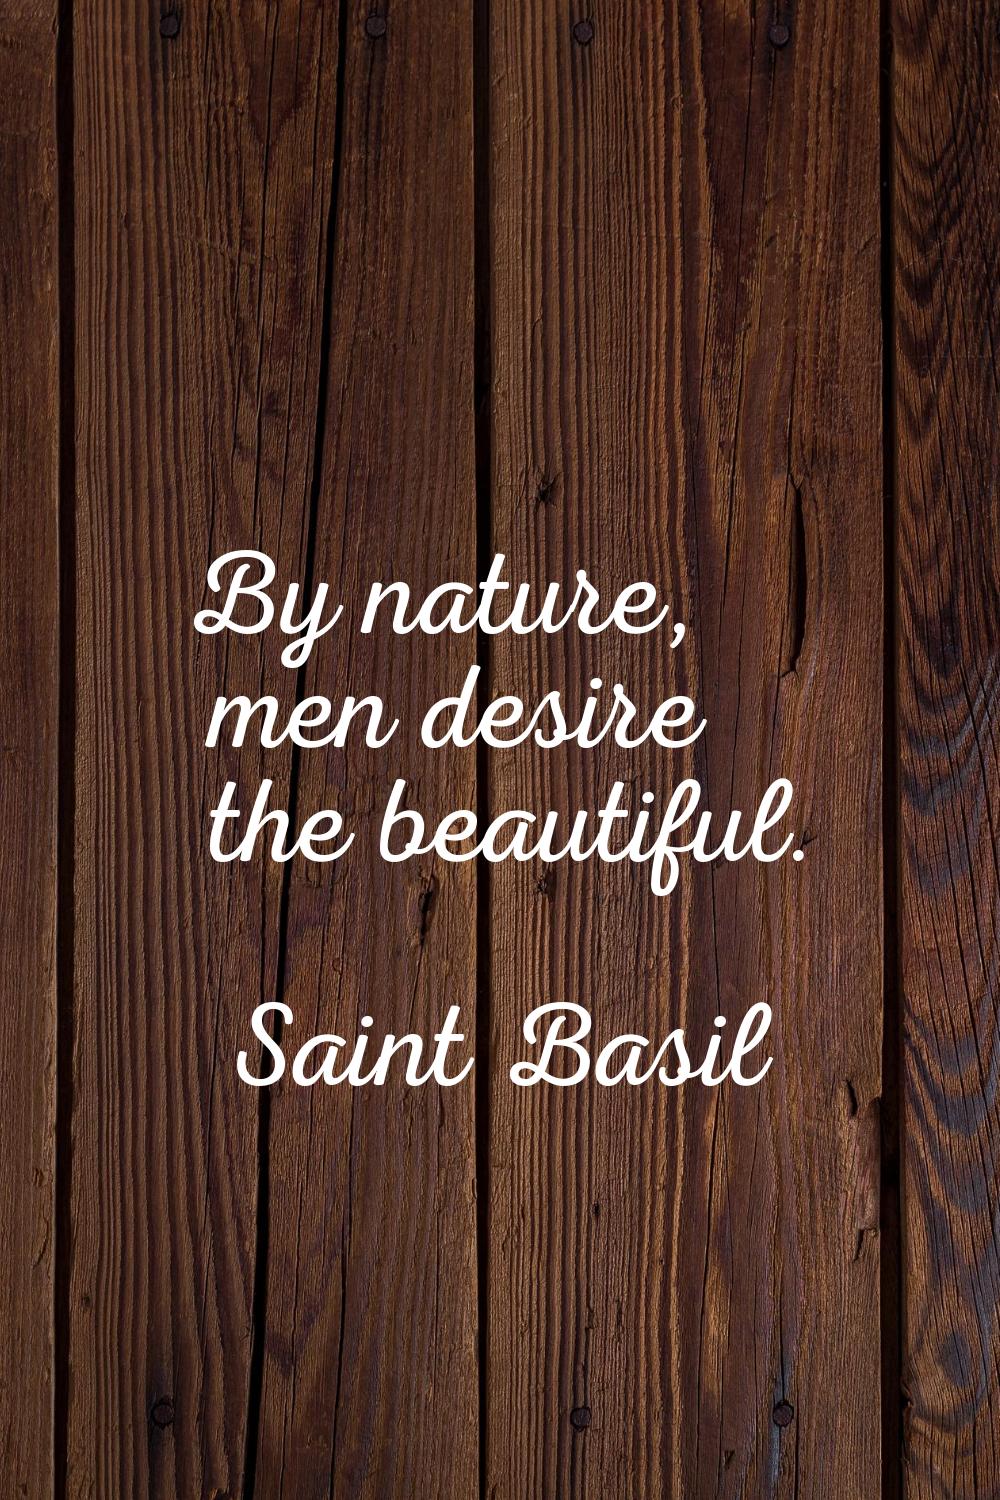 By nature, men desire the beautiful.